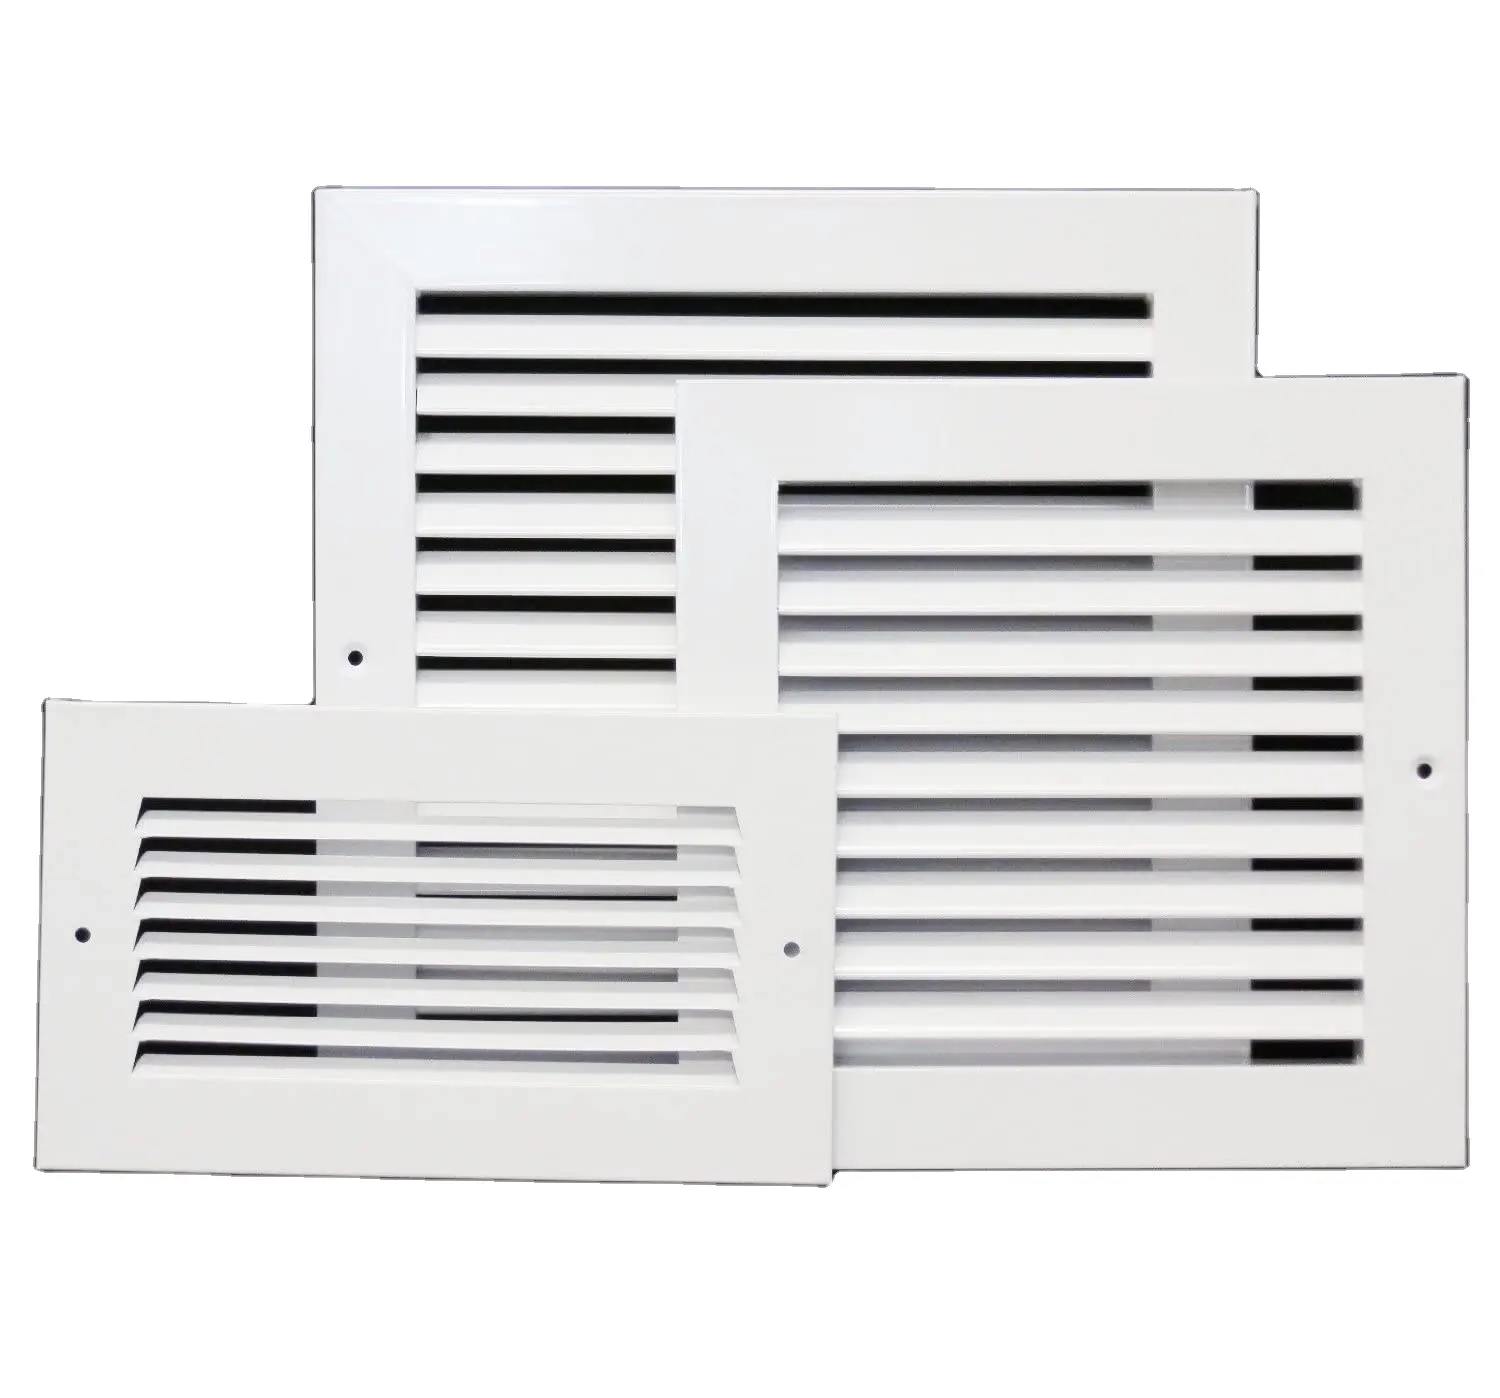 Air Flow HVAC Grille 1way Vent Adjustable Aluminum Outlet Air Conditioner Ducting Square Tube ABS